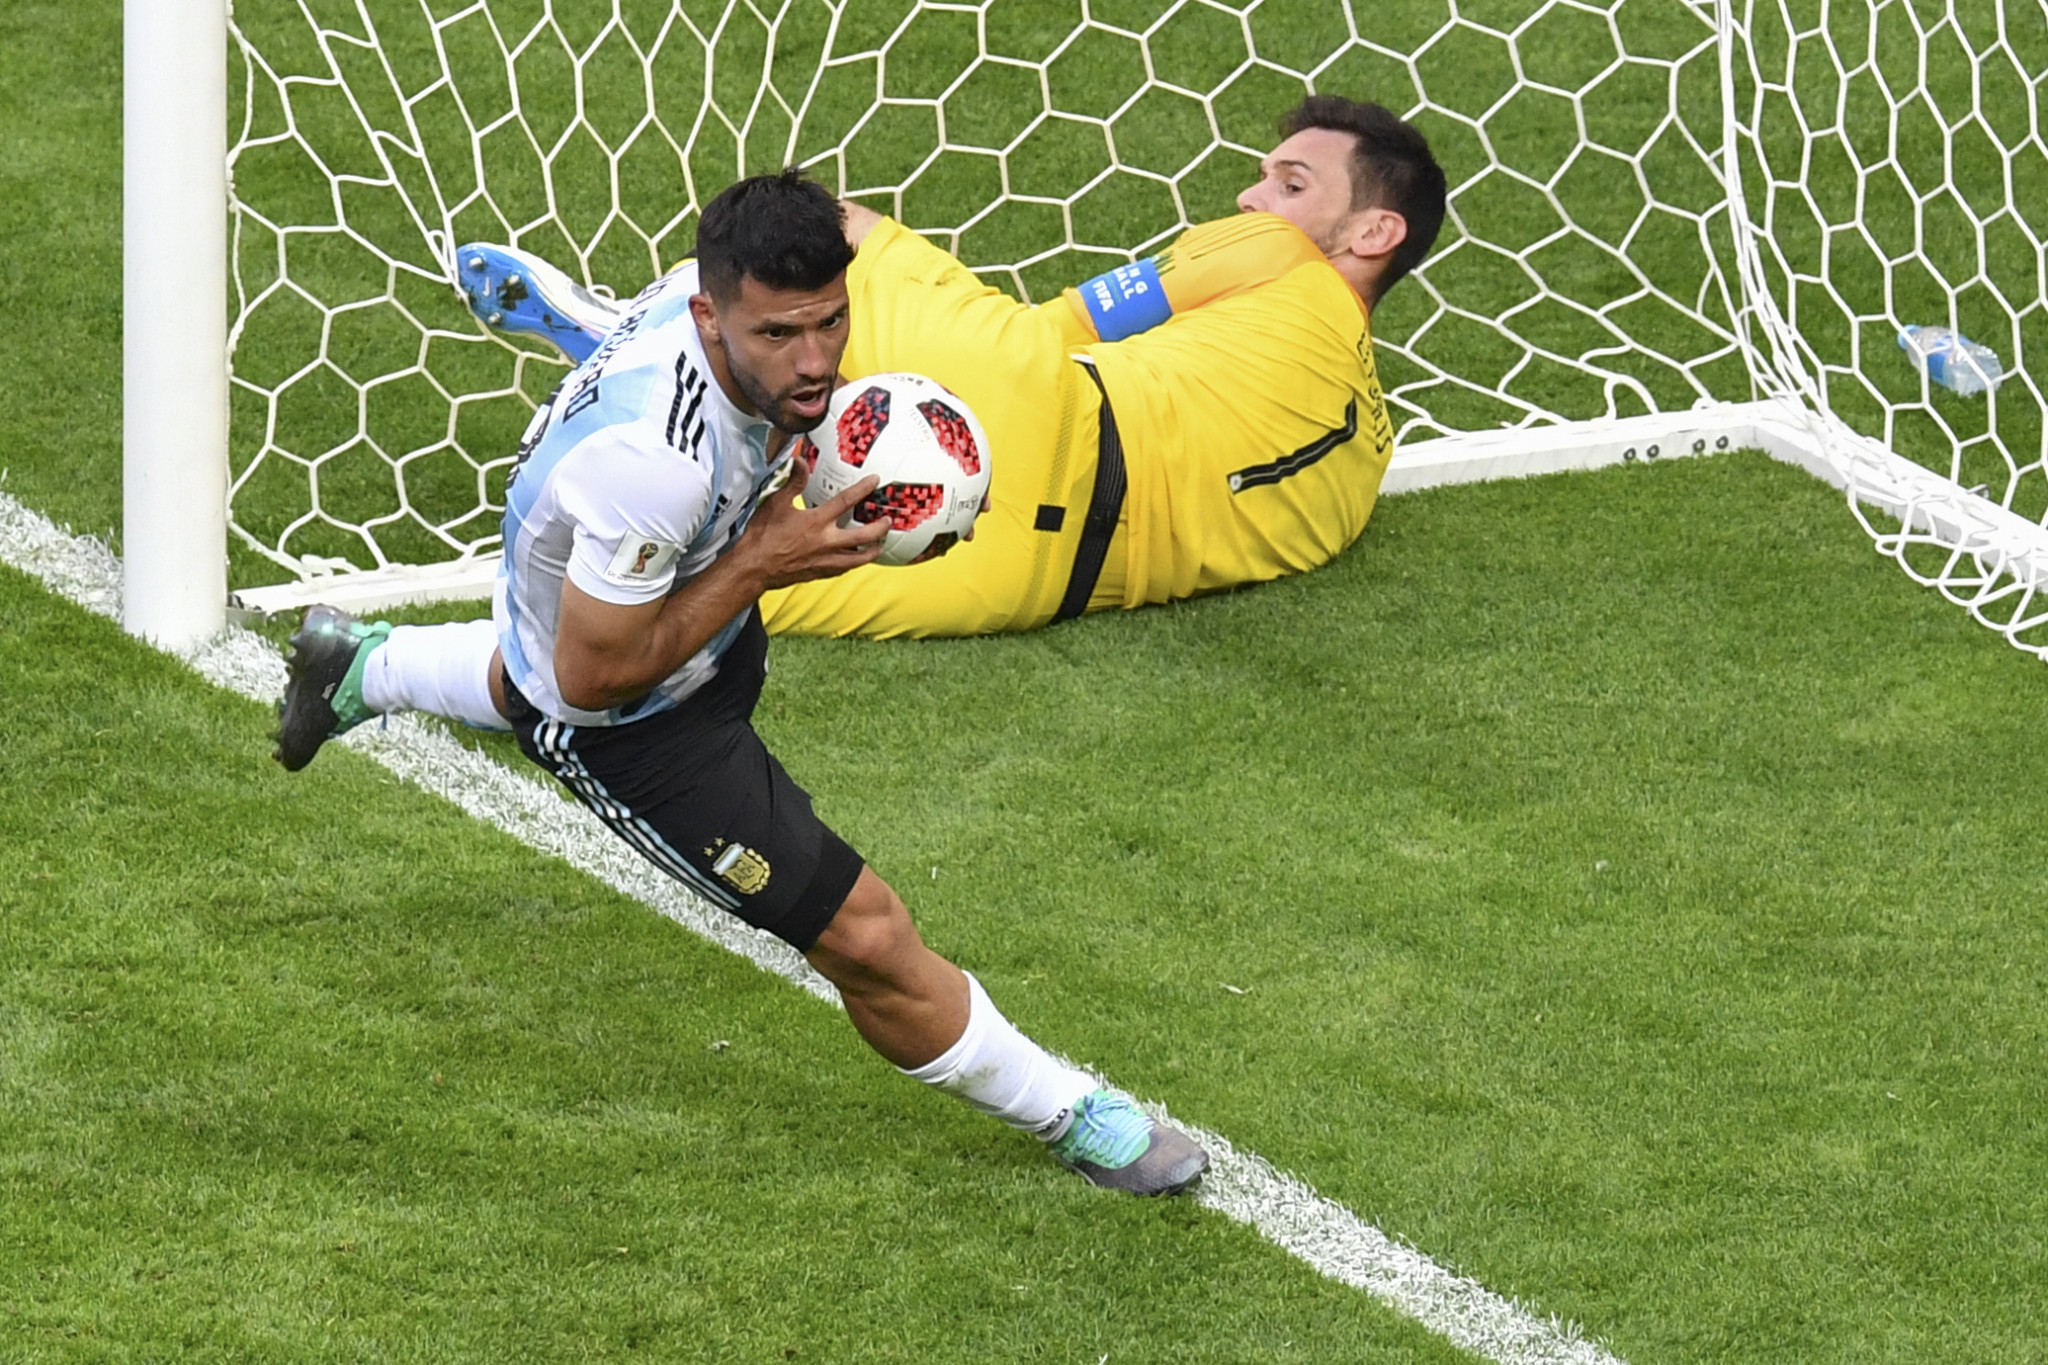 Sergio Aguero scored a late goal for Argentina, but it was not enough ©Getty Images